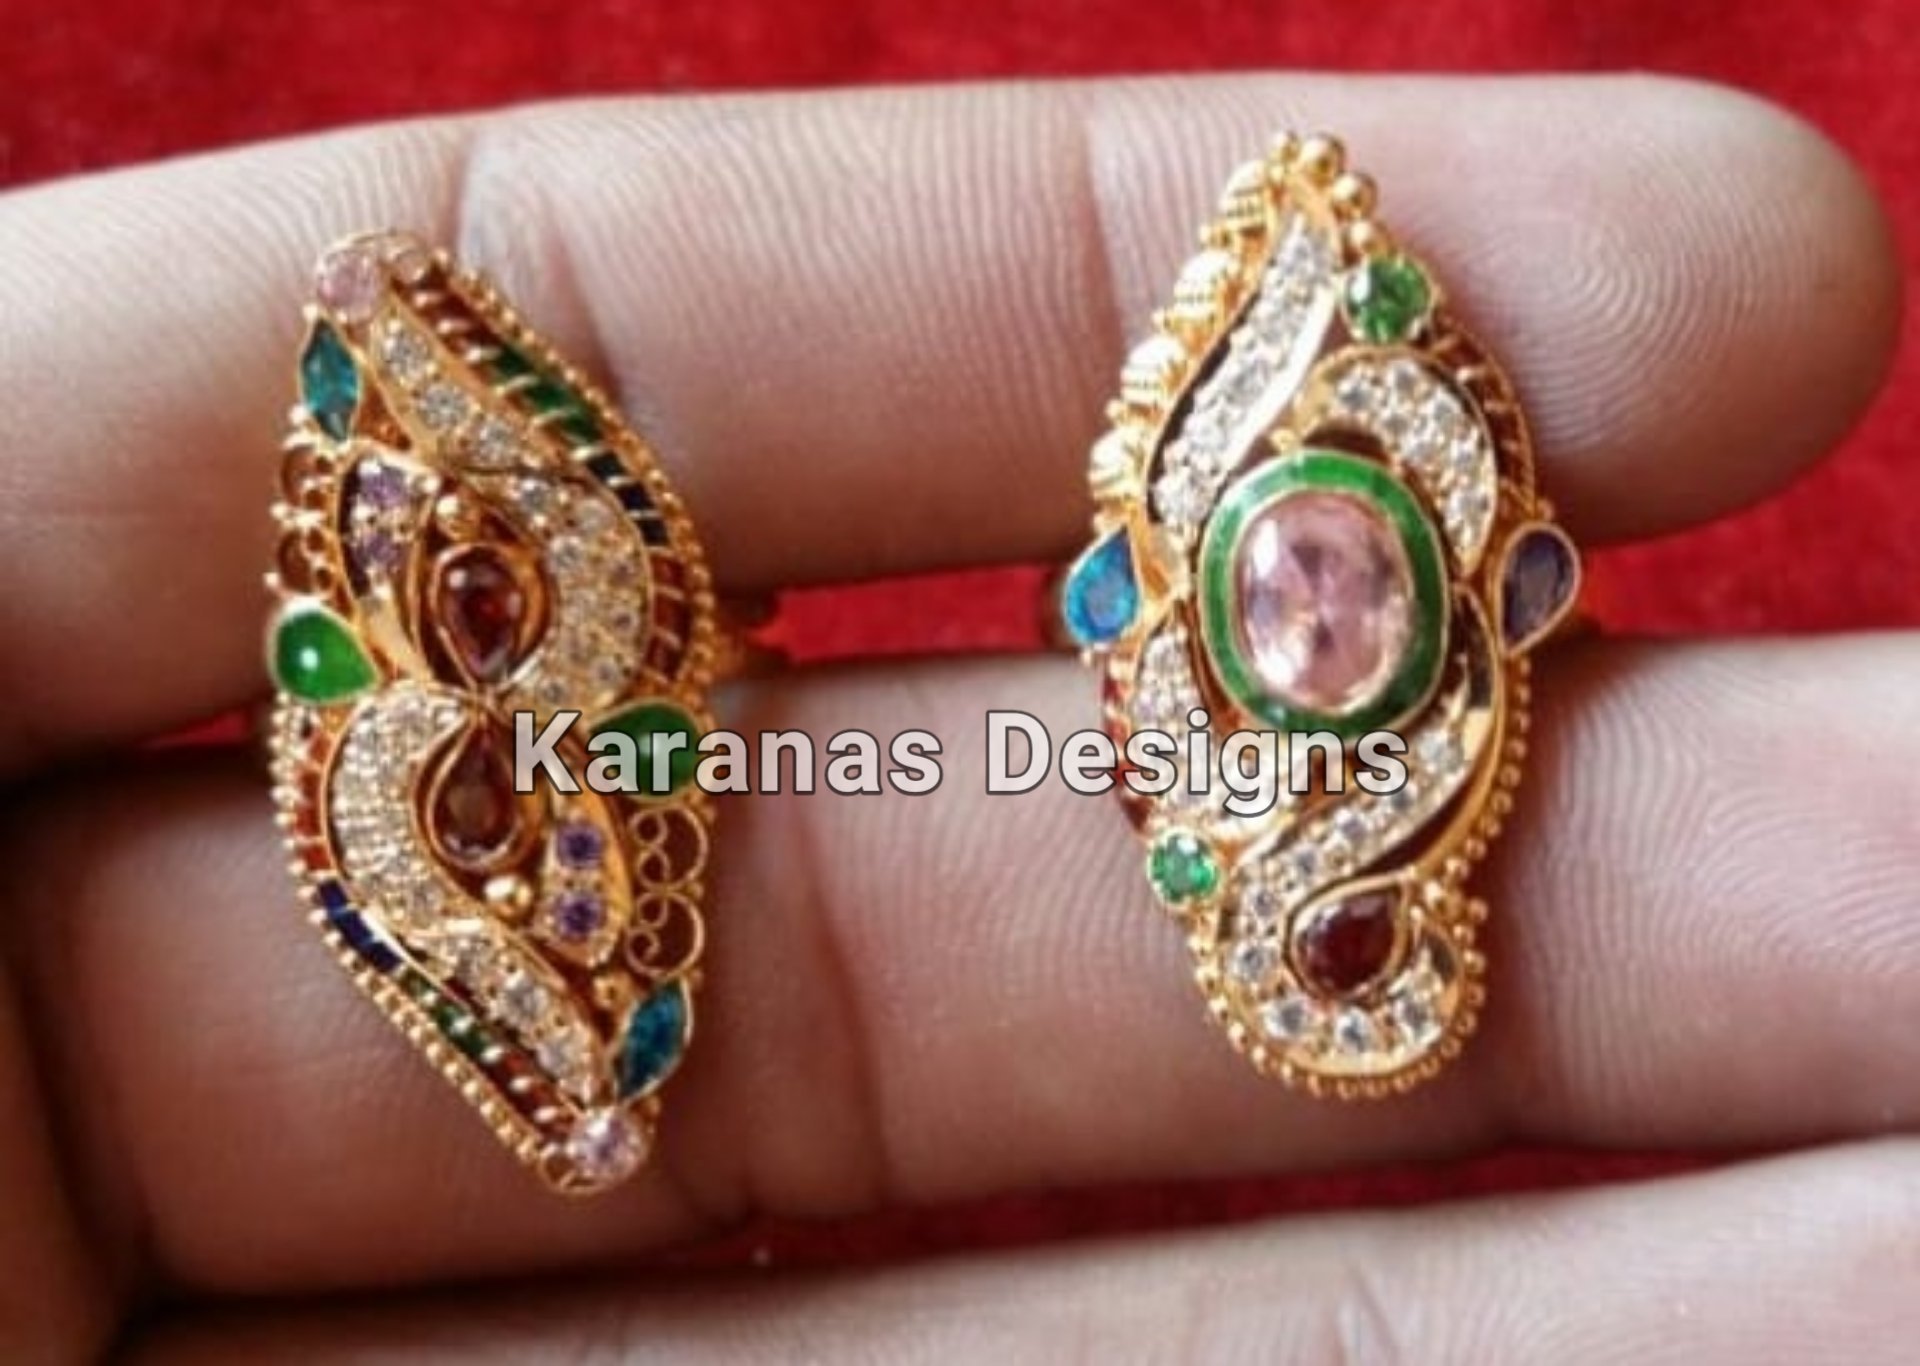 dewiss Rajasthani Traditional Beautiful Floral Design Ring For Girls, Women  Alloy Gold Plated Ring Price in India - Buy dewiss Rajasthani Traditional  Beautiful Floral Design Ring For Girls, Women Alloy Gold Plated